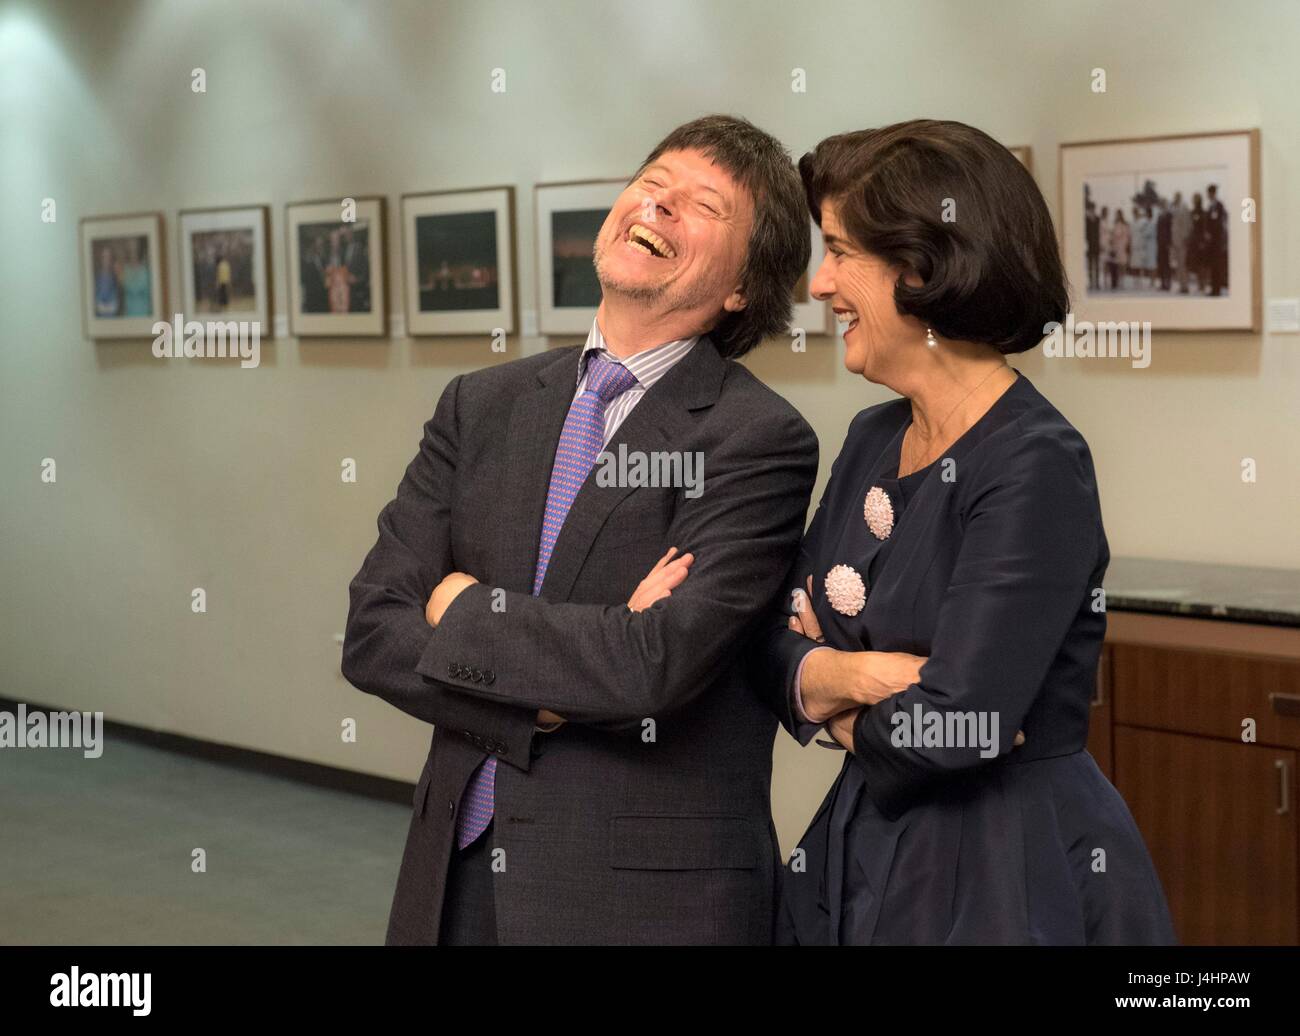 Documentary filmmaker Ken Burns and daughter of former U.S. President Lyndon B. Johnson, Luci Baines Johnson, talk in the green room before the presentation of the 2017 Lady Bird Johnson Environmental Award at the LBJ Presidential Library April 27, 2017 in Austin, Texas.     (photo by Jay Godwin/LBJ Presidential Library  via Planetpix) Stock Photo